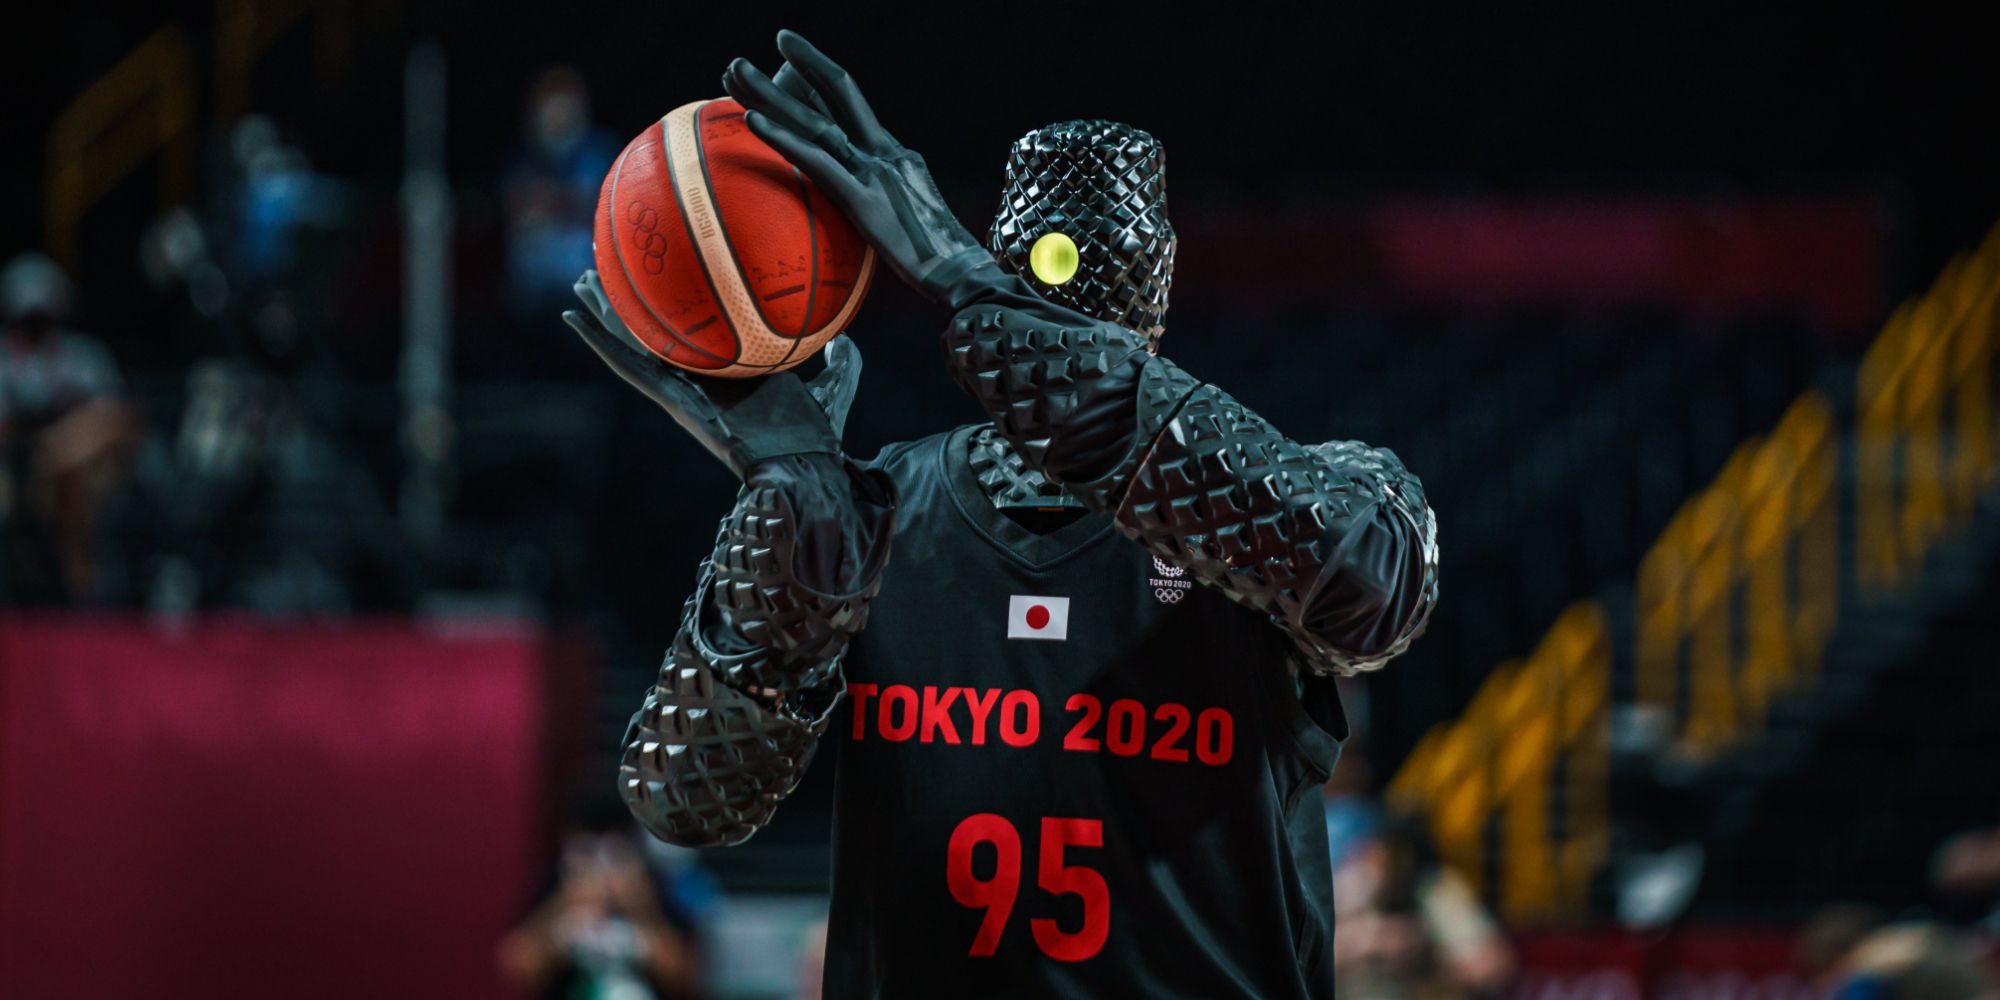 Japan Built A Basketball Robot For The Olympics And Its Awesome